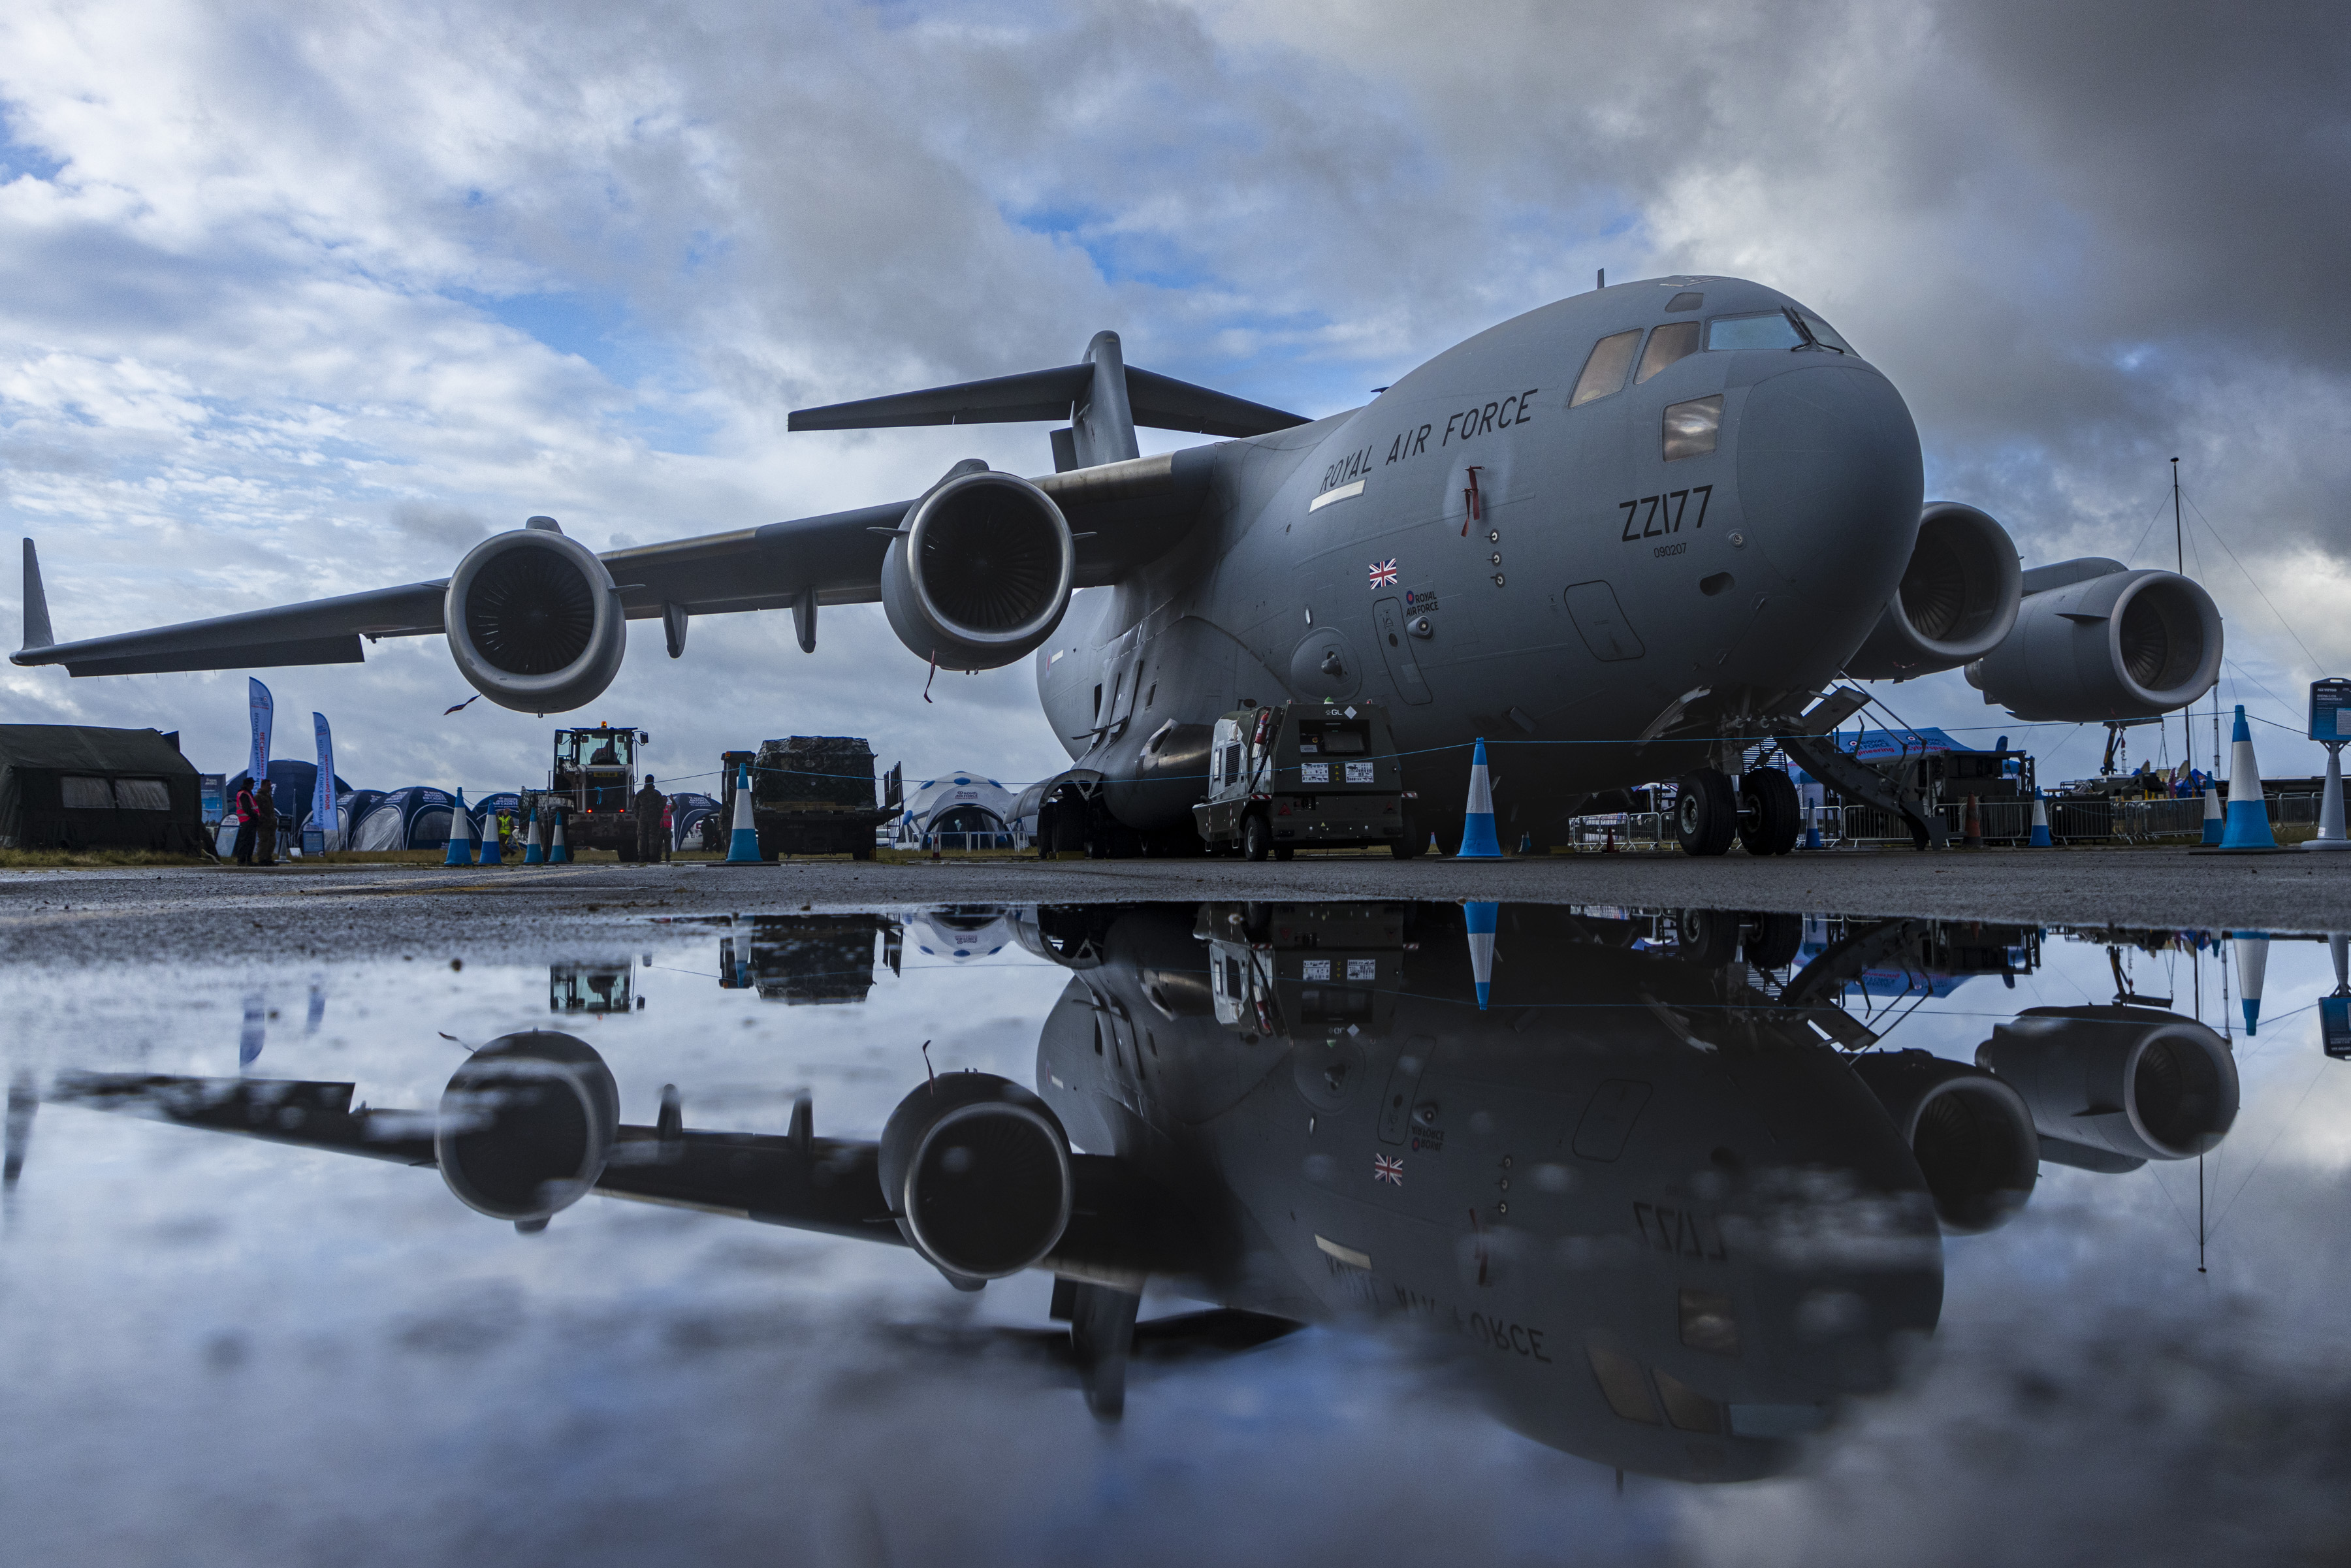 C17 aircraft on wet runway, perfectly reflected in the water